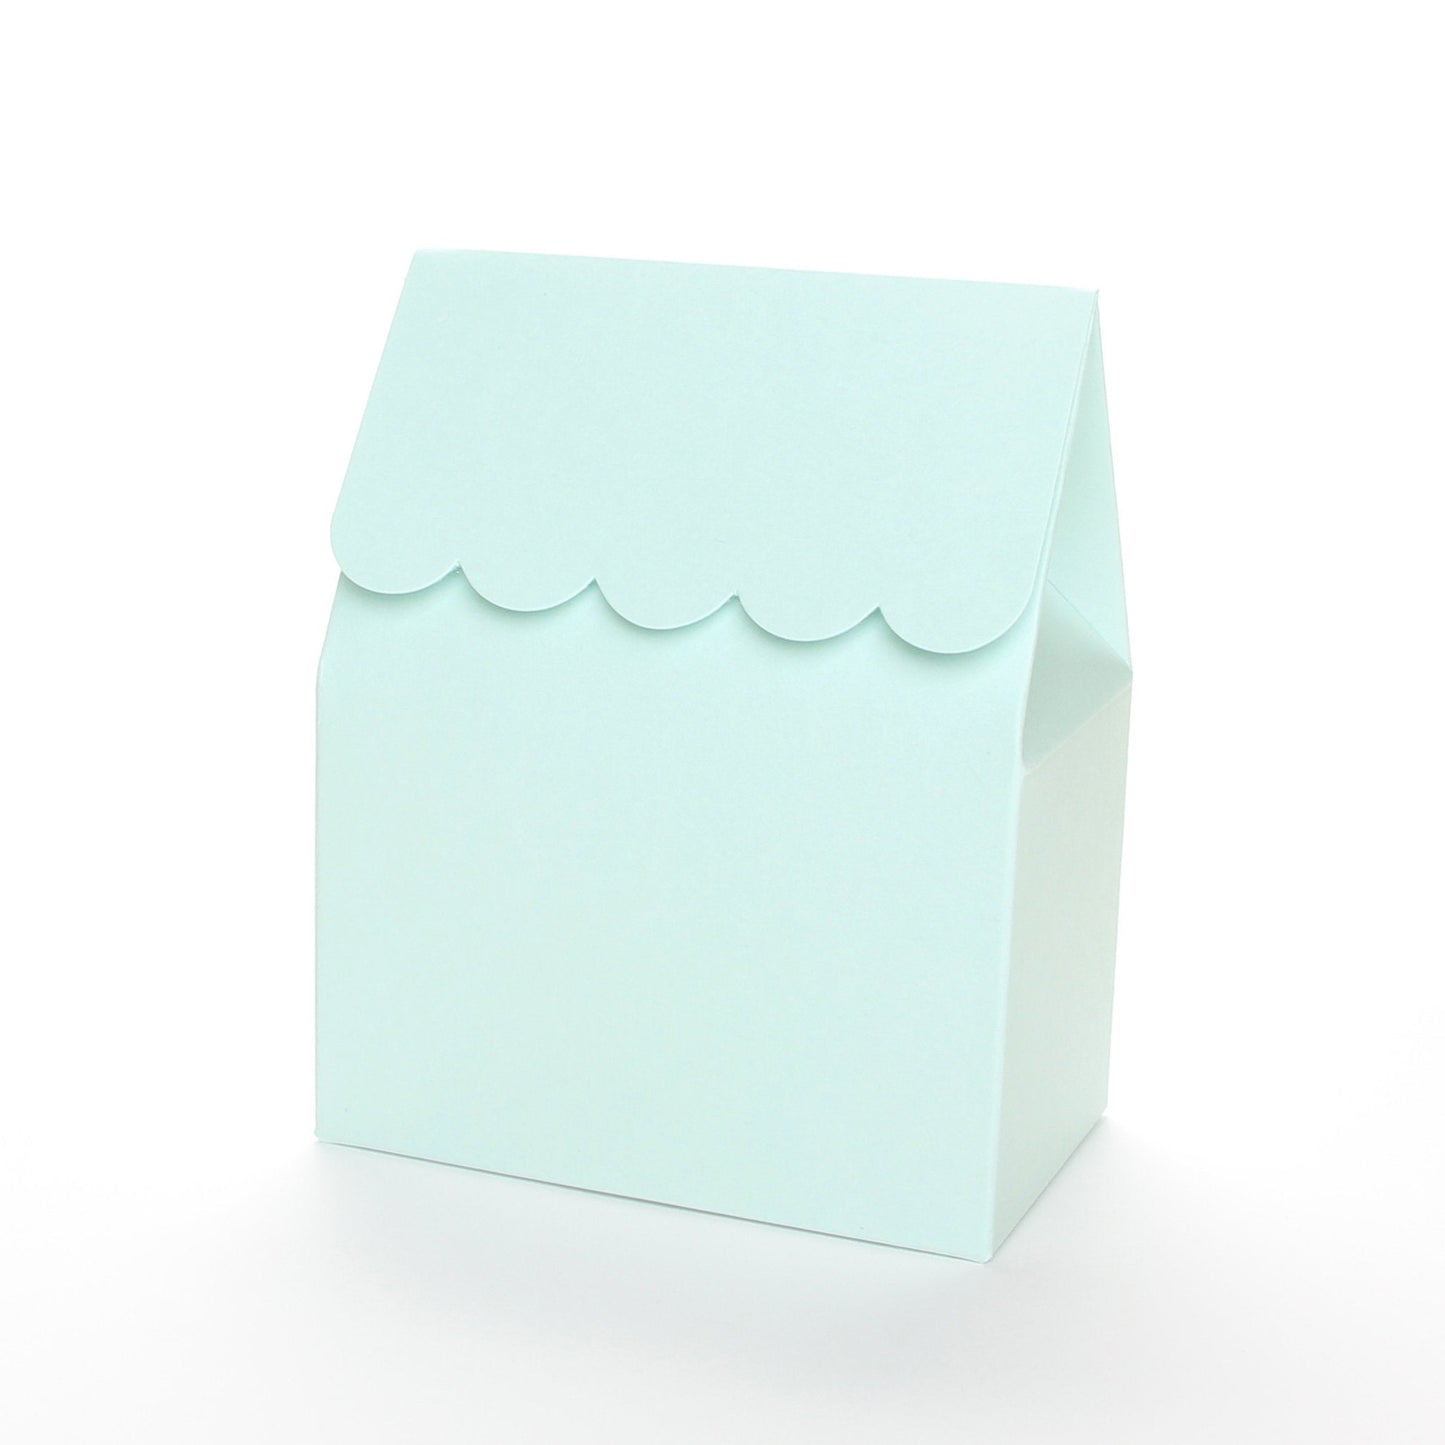 Light blue favor box by Lux Party with a scalloped edge on a white background.